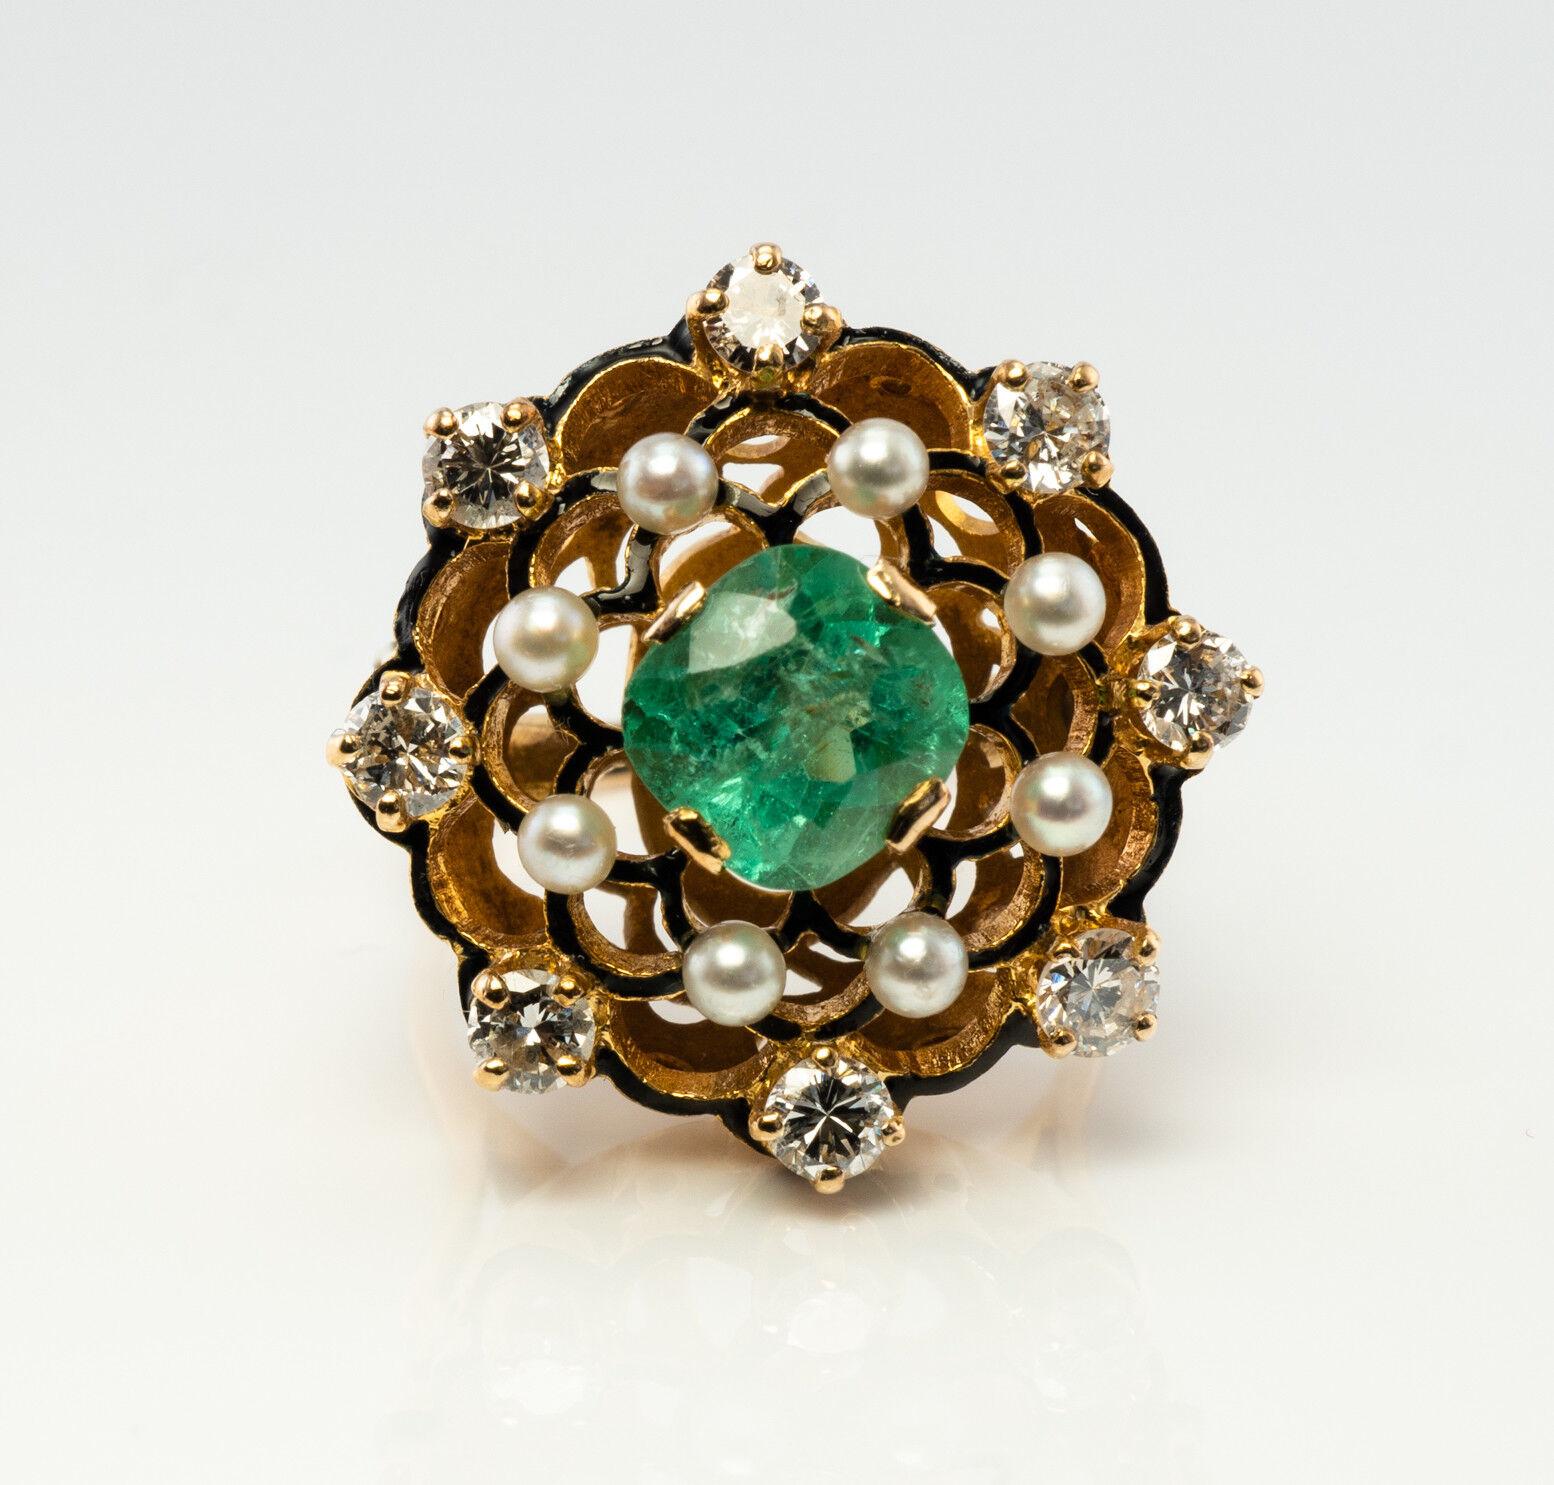 Diamond Colombian Emerald Pearl Ring Black 14K Gold Vintage

This gorgeous vintage ring is finely crafted in solid 14K Yellow Gold and set with genuine Earth mined Colombian Emerald, white and fiery diamonds, and natural cultured pearls. The center